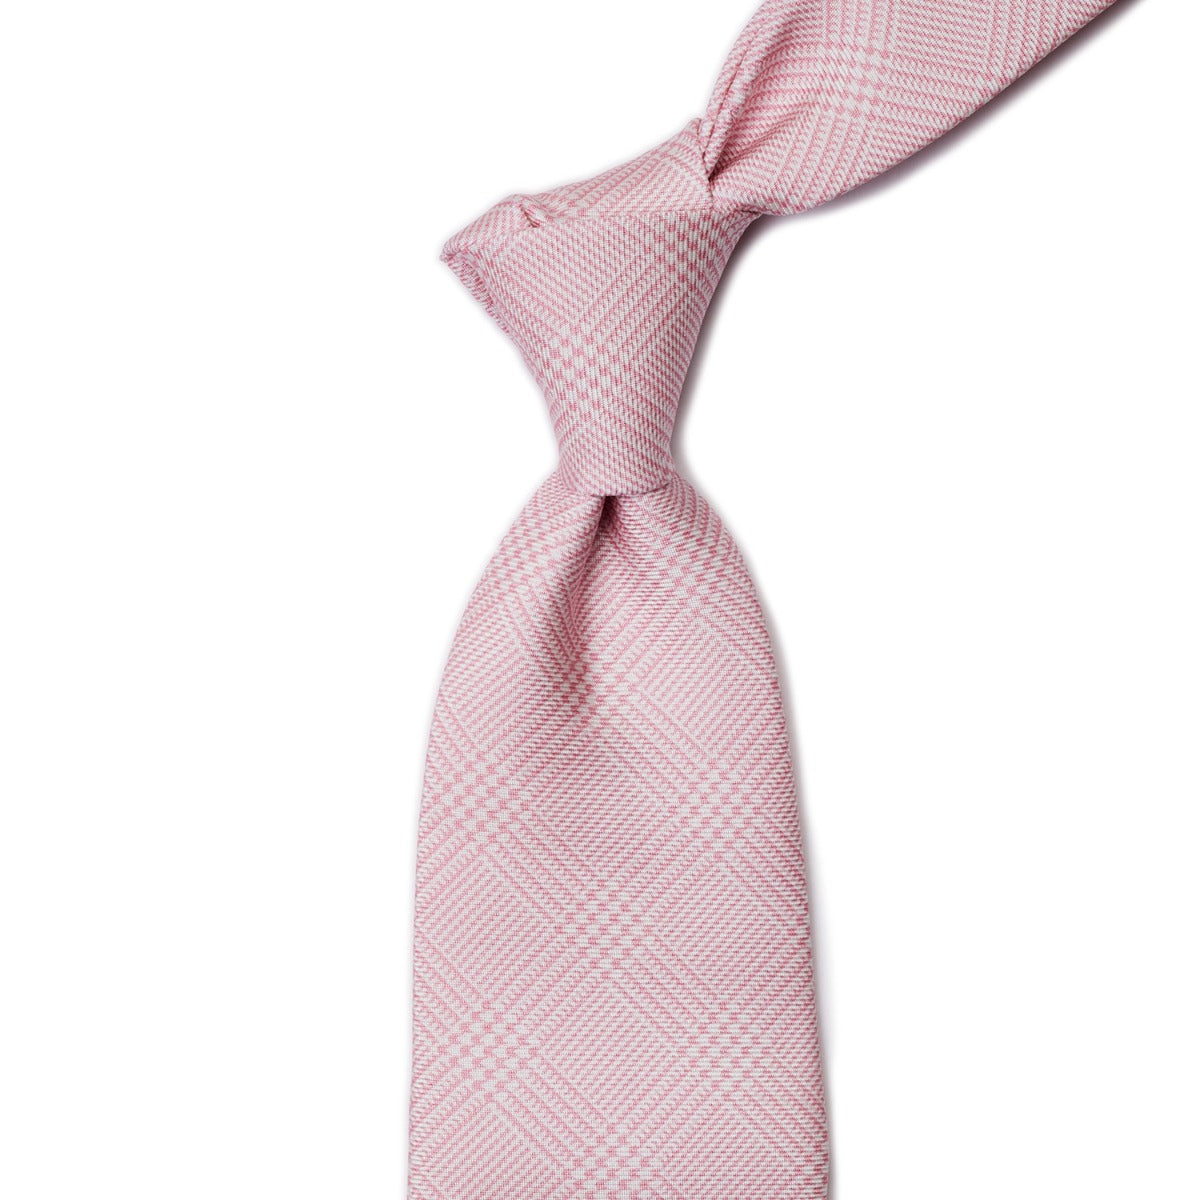 A KirbyAllison.com Sovereign Grade Pink Prince of Wales Check, 150 CM tie on a white background.